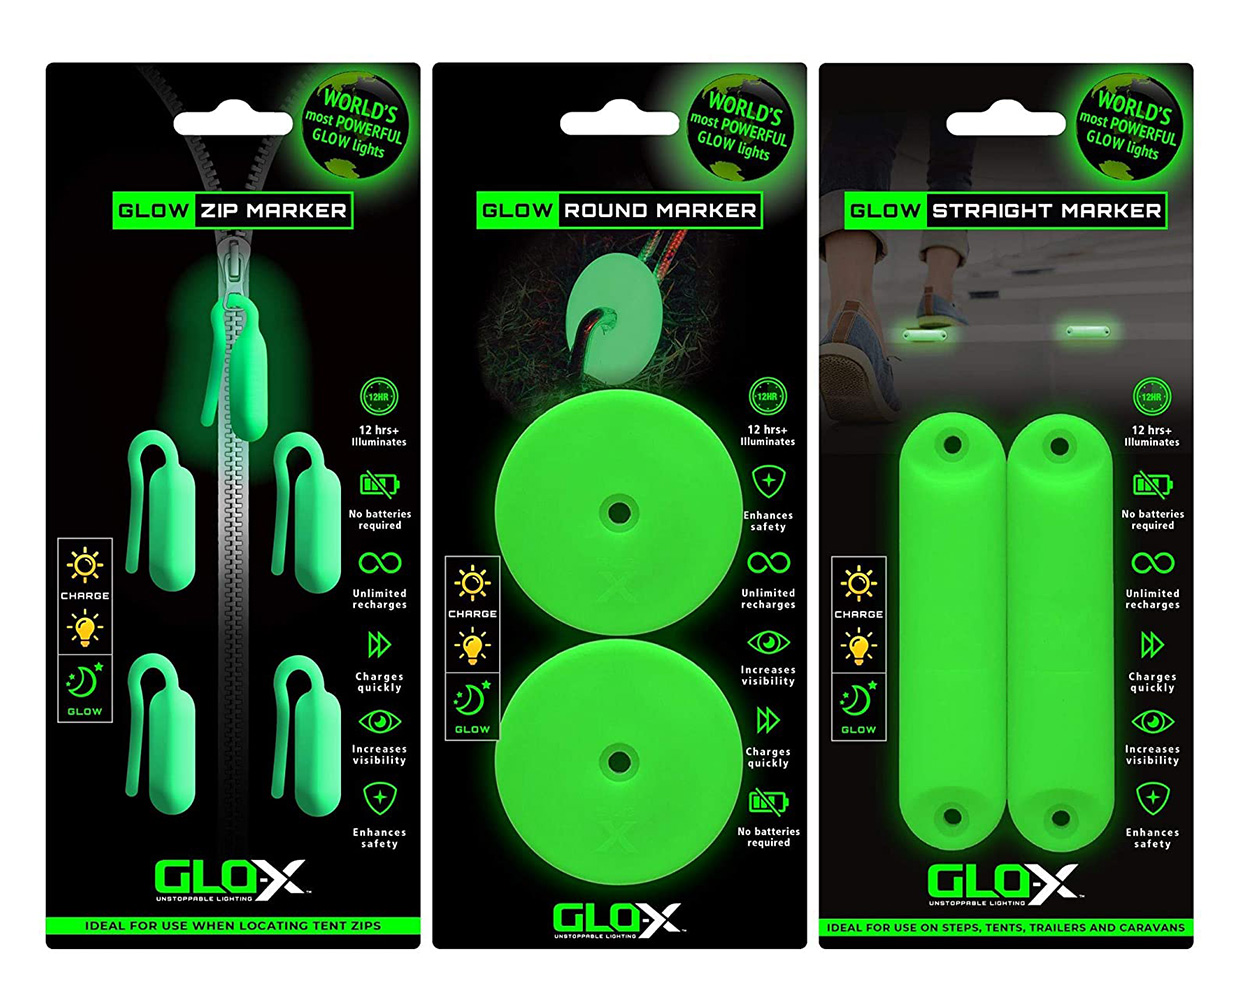 GLO-X Glowing Campers Essentials